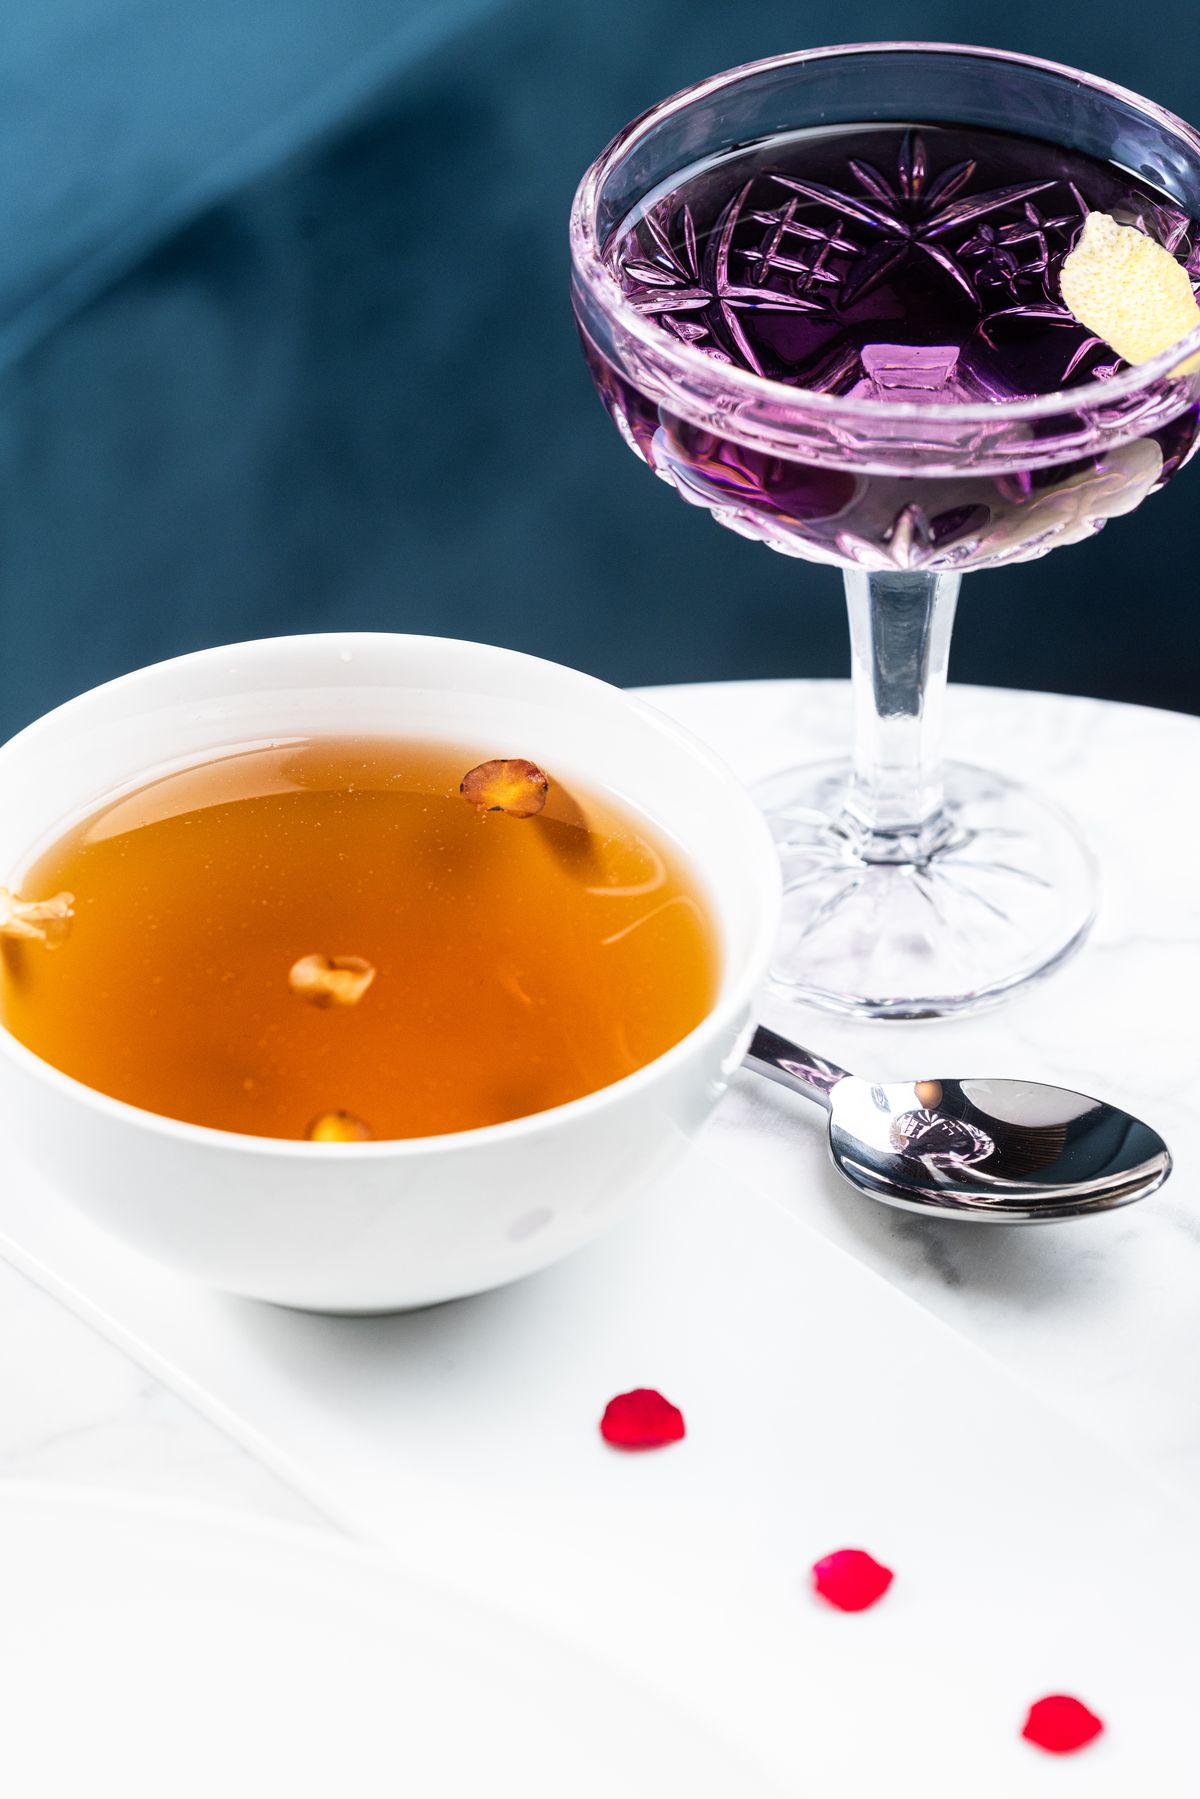 A white bowl filled with brown broth and a few floating flower petals is on the left. On the right is an engraved glass coupe with a purple cocktail and a twist of lemon.